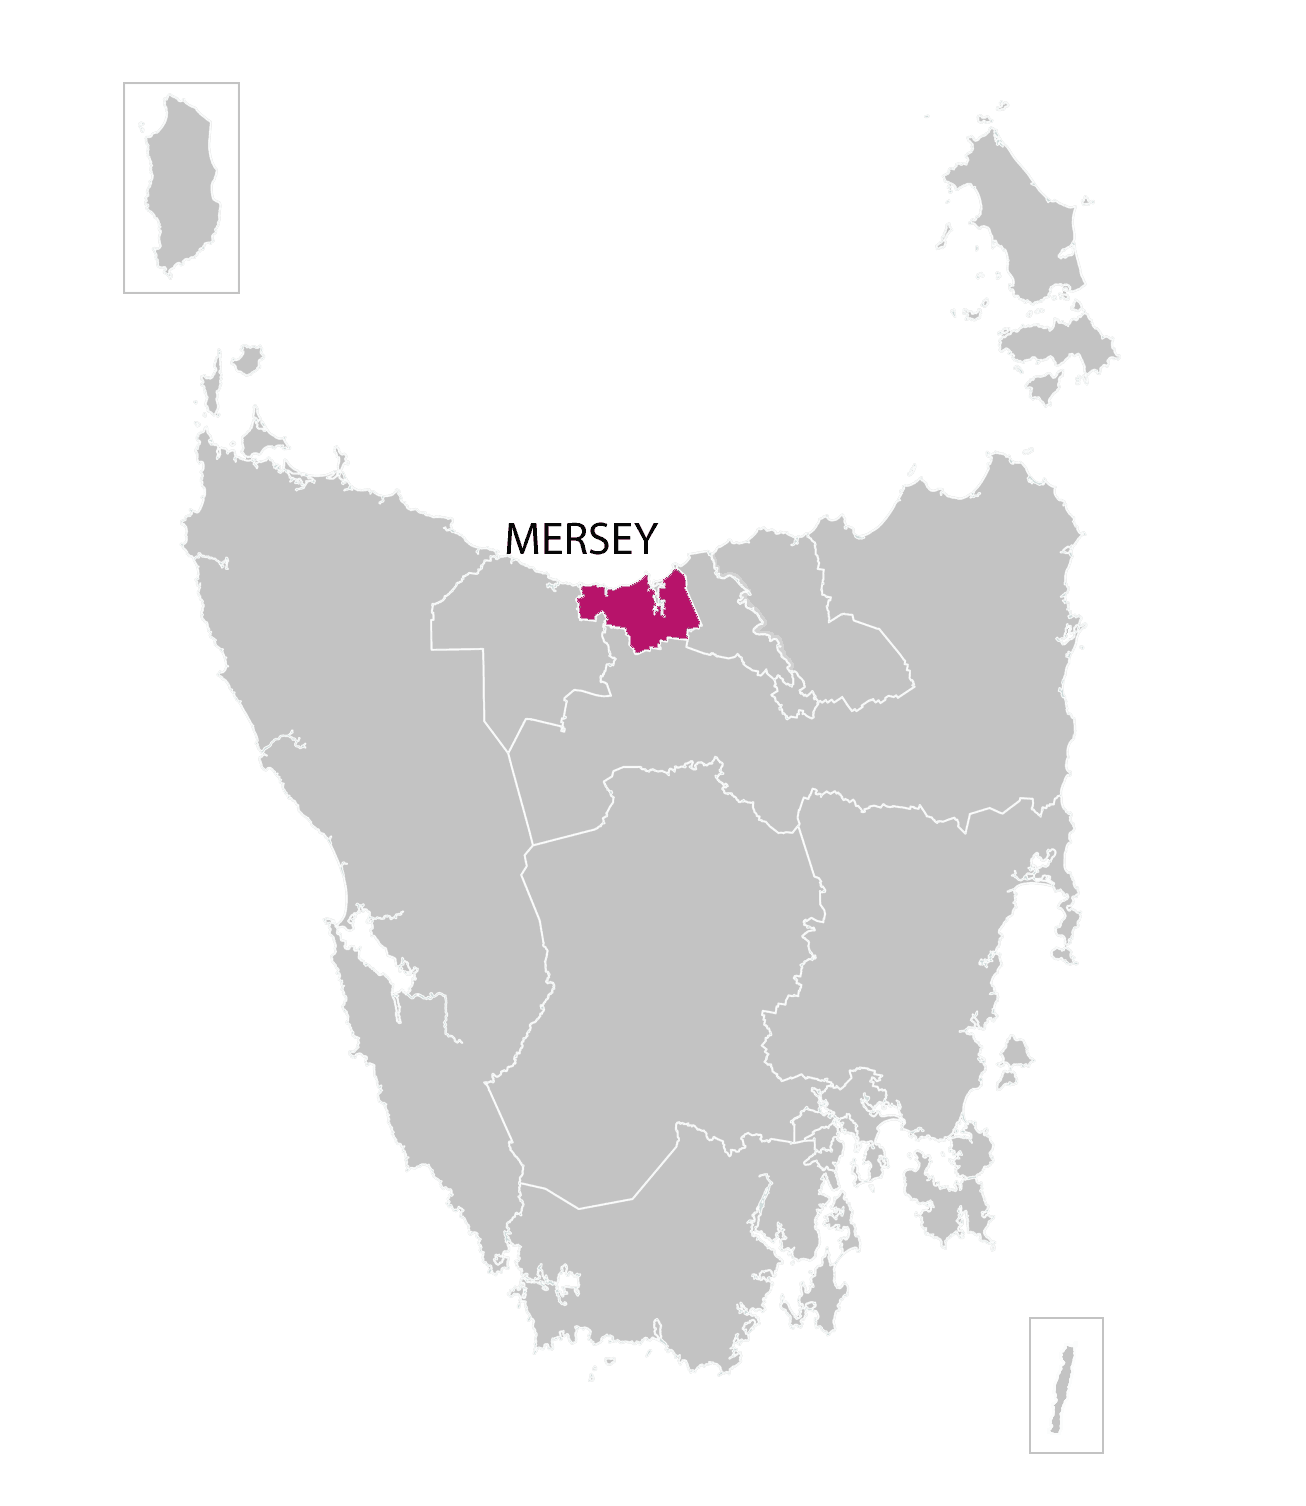 Mersey division highlighted on illustrated map of Tasmania